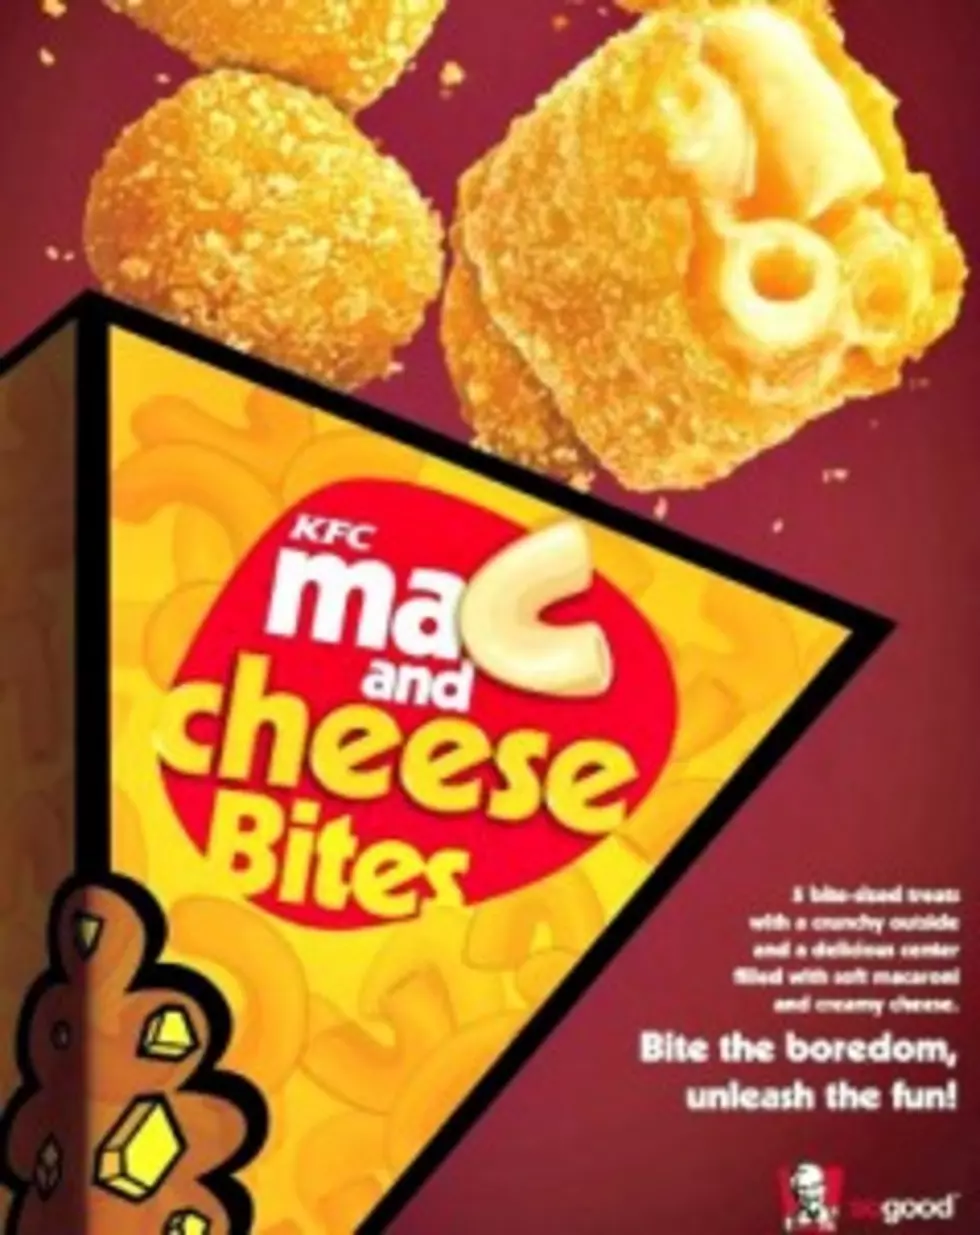 KFC Unveils Mac And Cheese Bites&#8230;.In The Philippines [POLL]